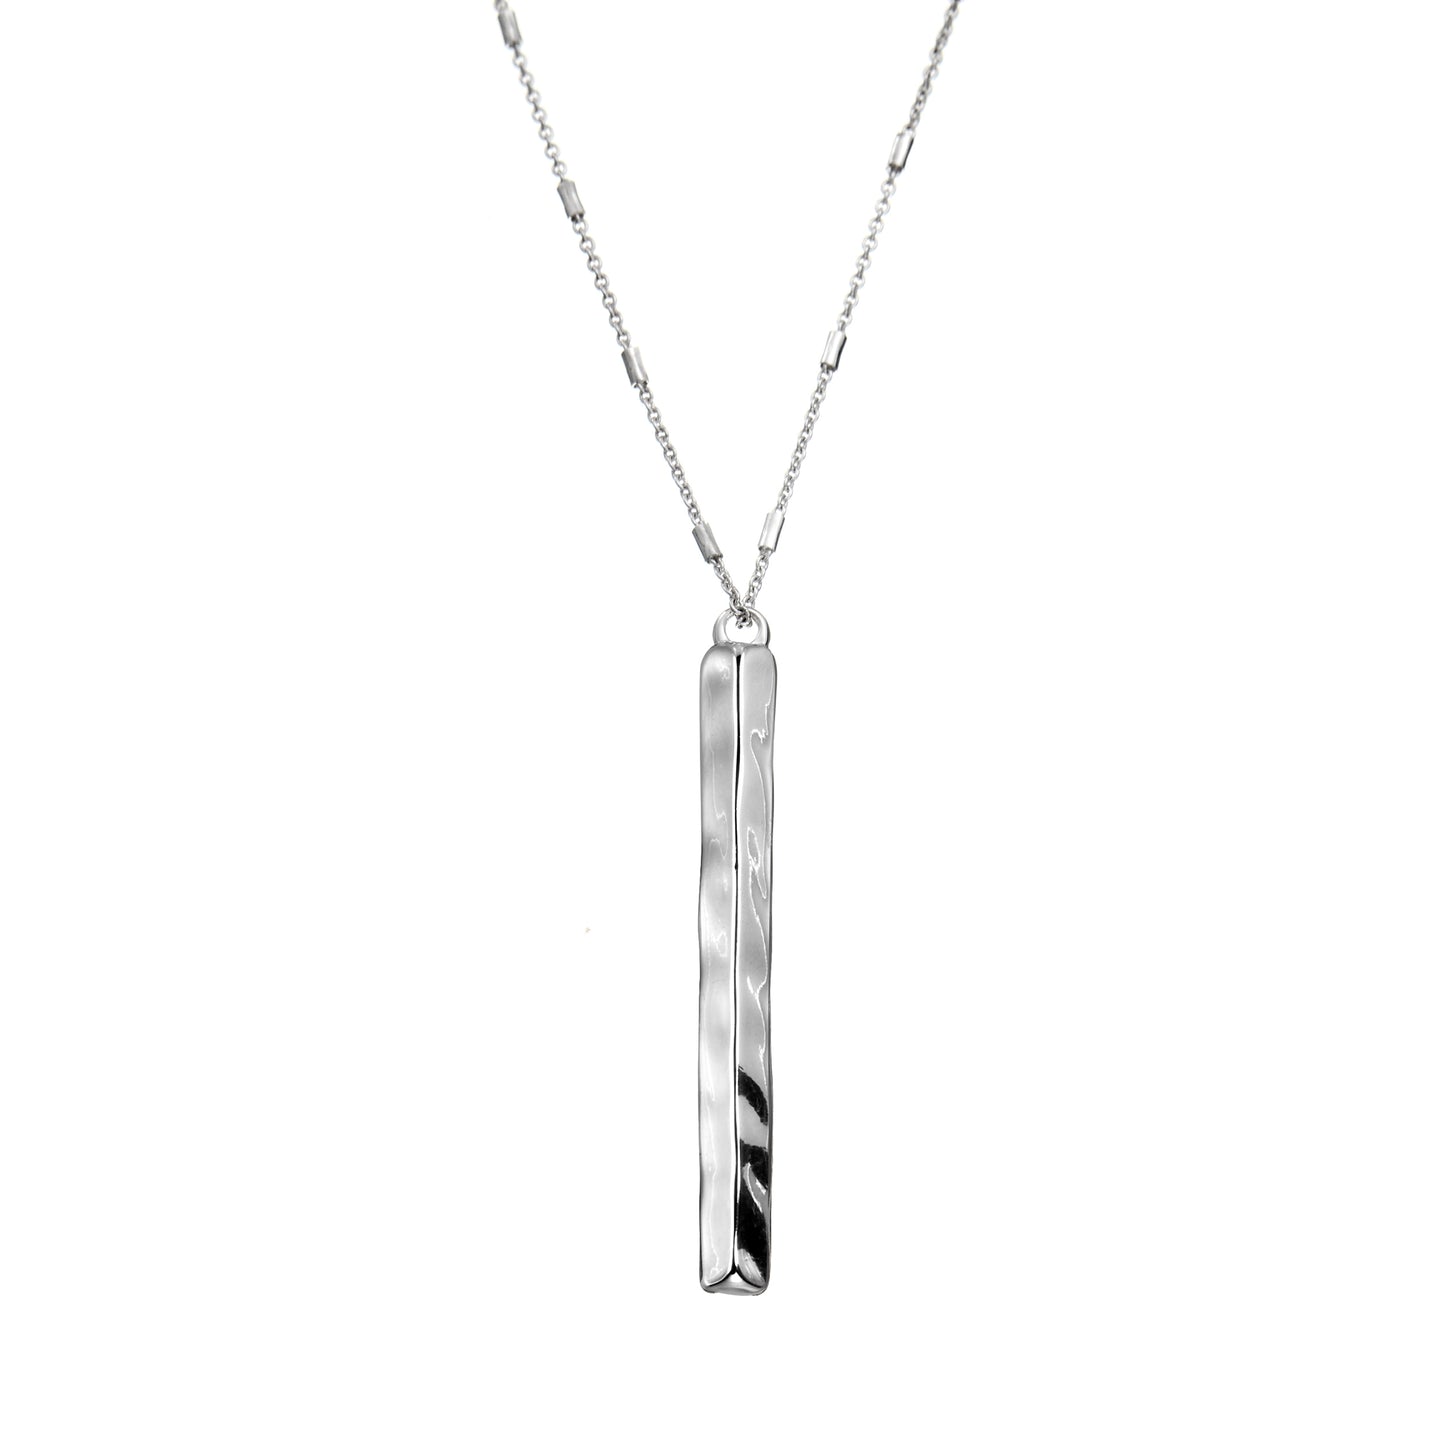 MJ Silver necklace with long vertical bar pendant on a detailed chain